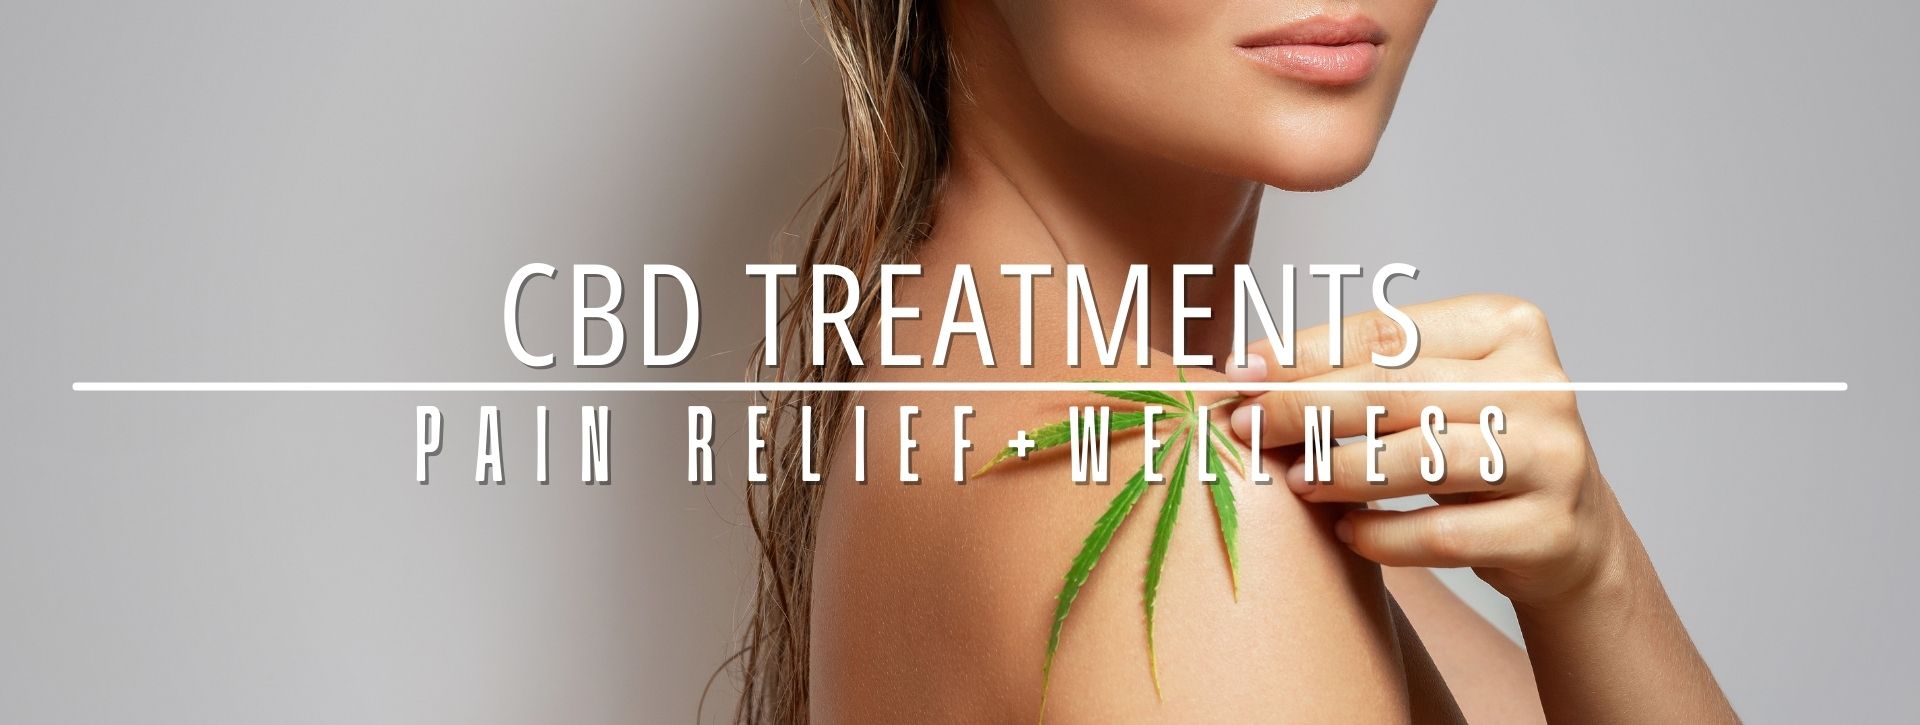 woman showing her shoulder holding leave promoting cbd treatments